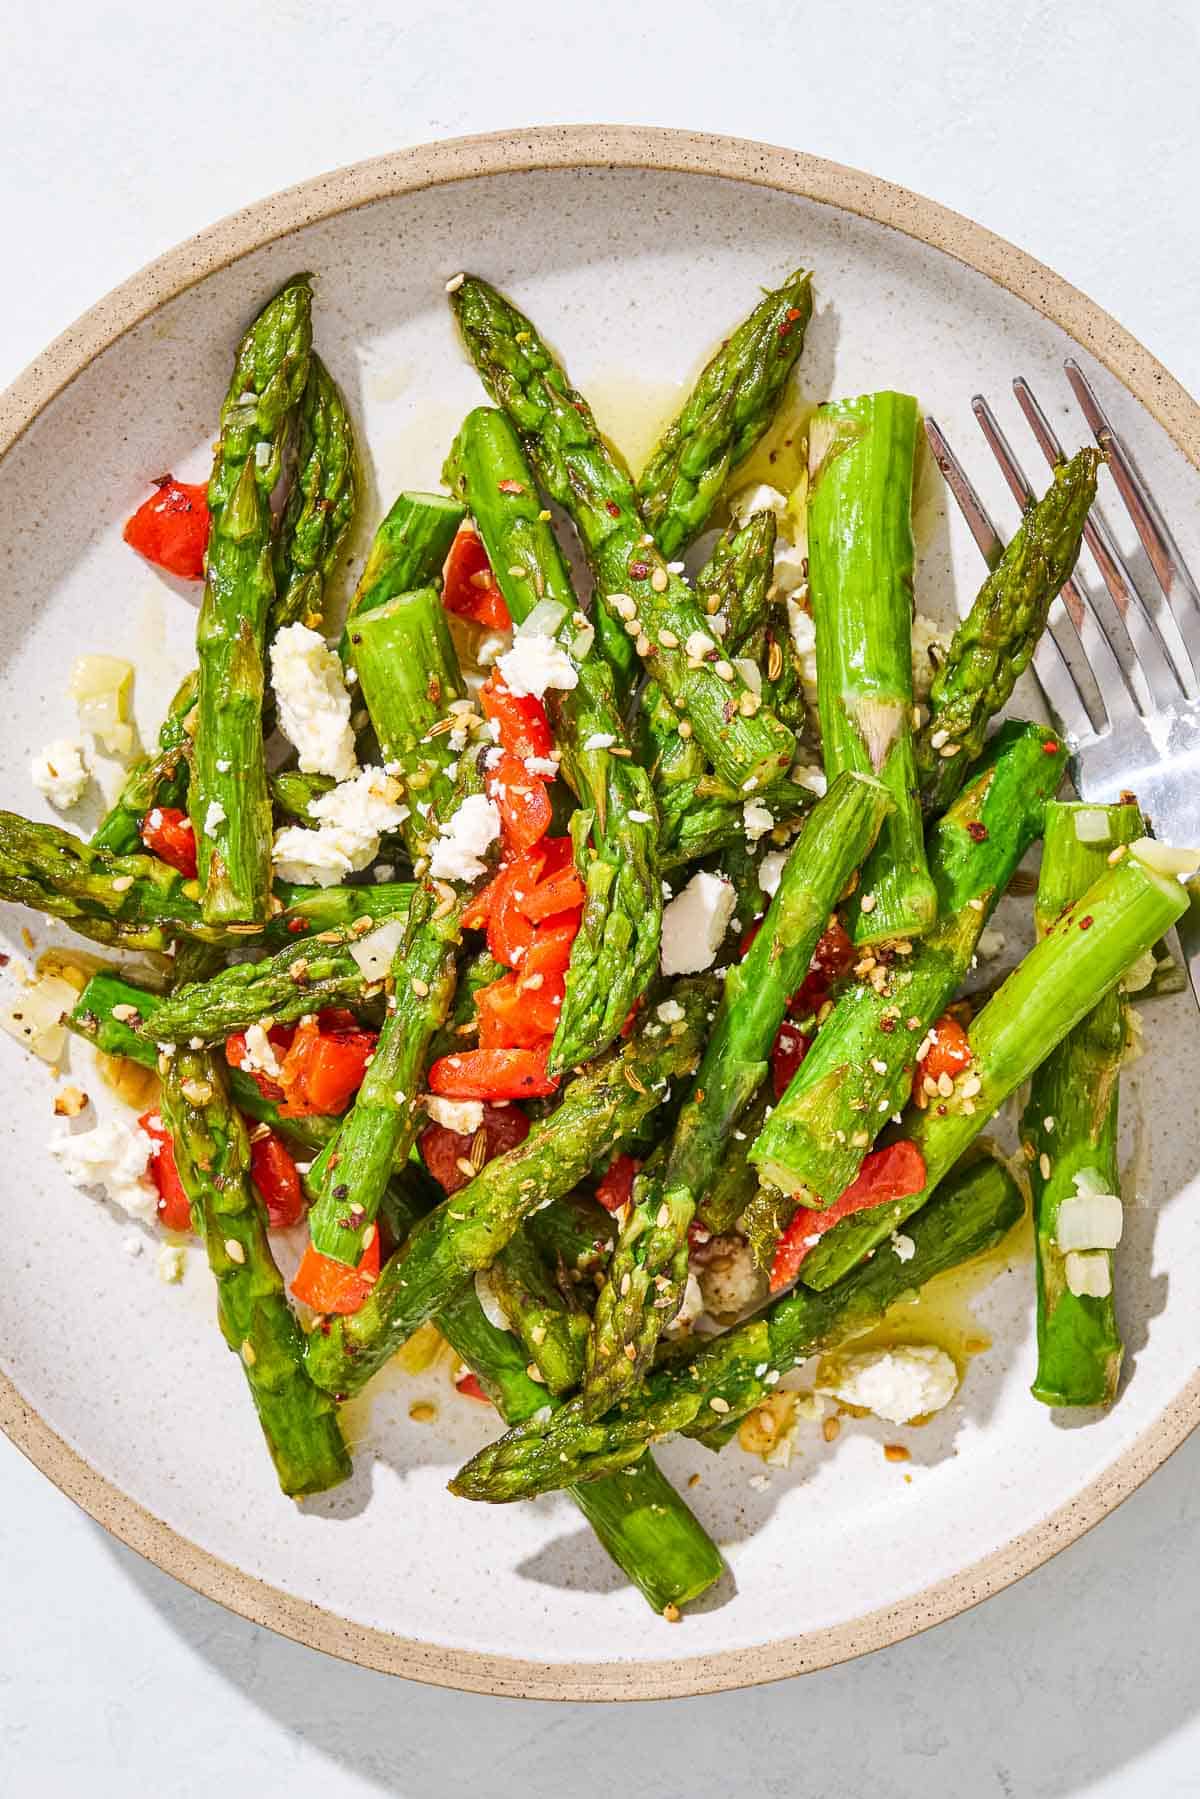 A serving of sauteed asparagus topped with chopped red peppers and crumbled feta on a plate with a fork.